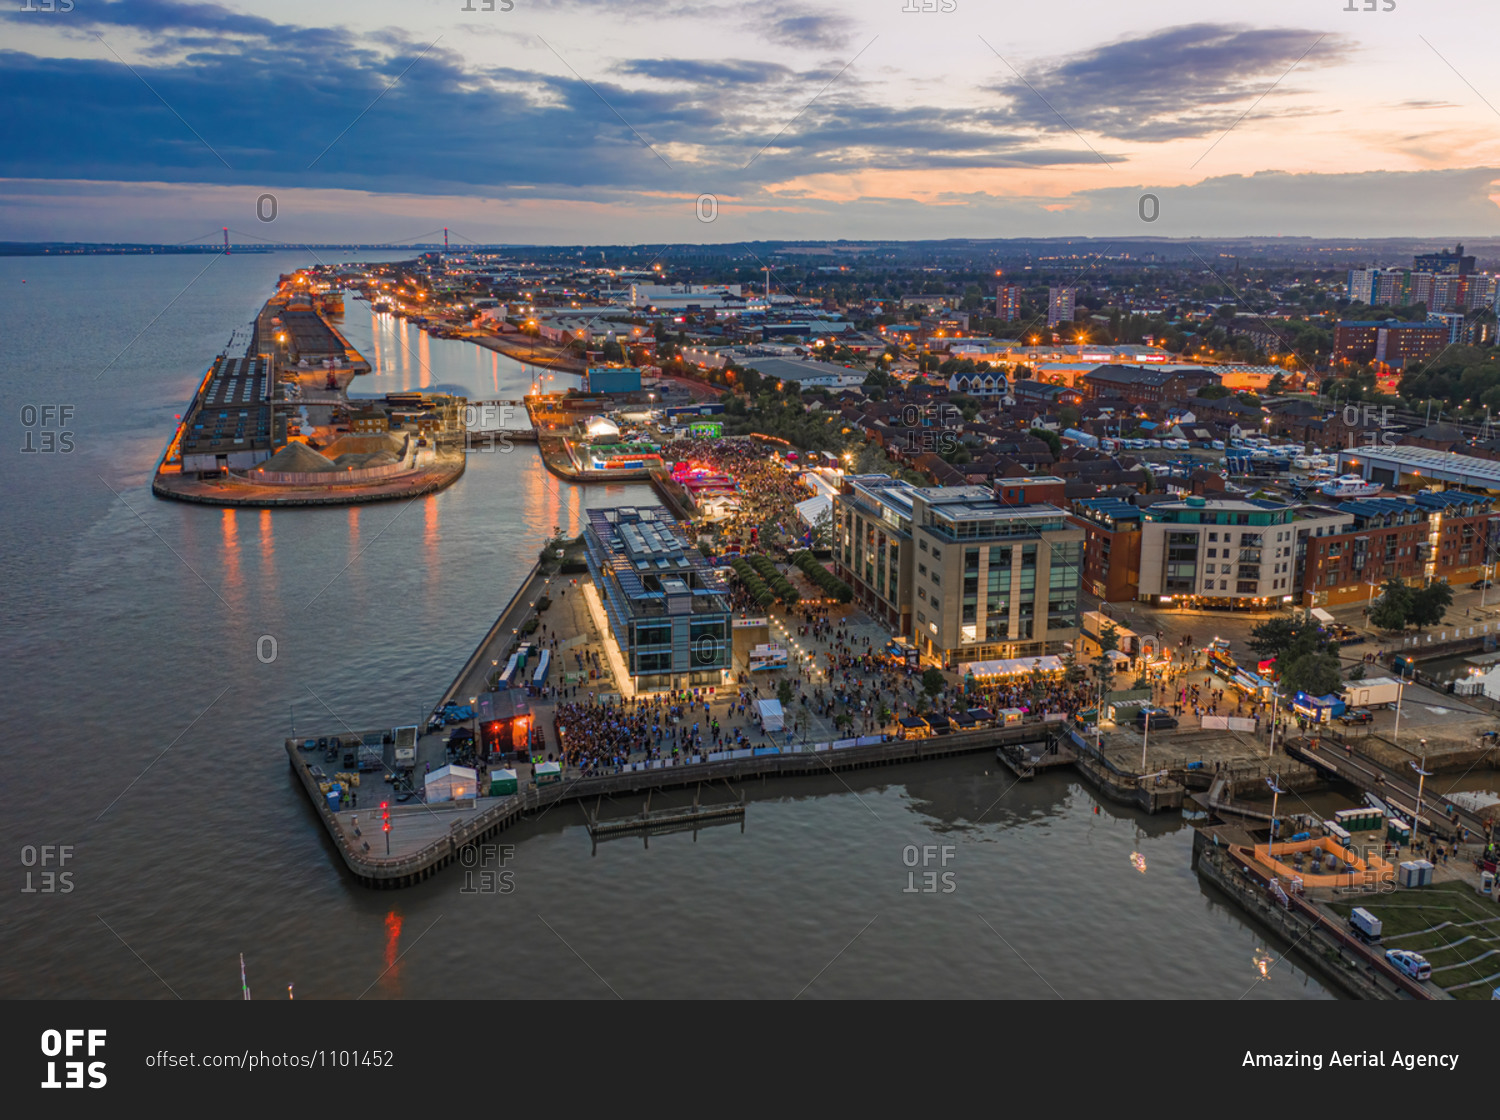 Aerial view of Hull city center and the harbor along the Humber river at sunset, United Kingdom.